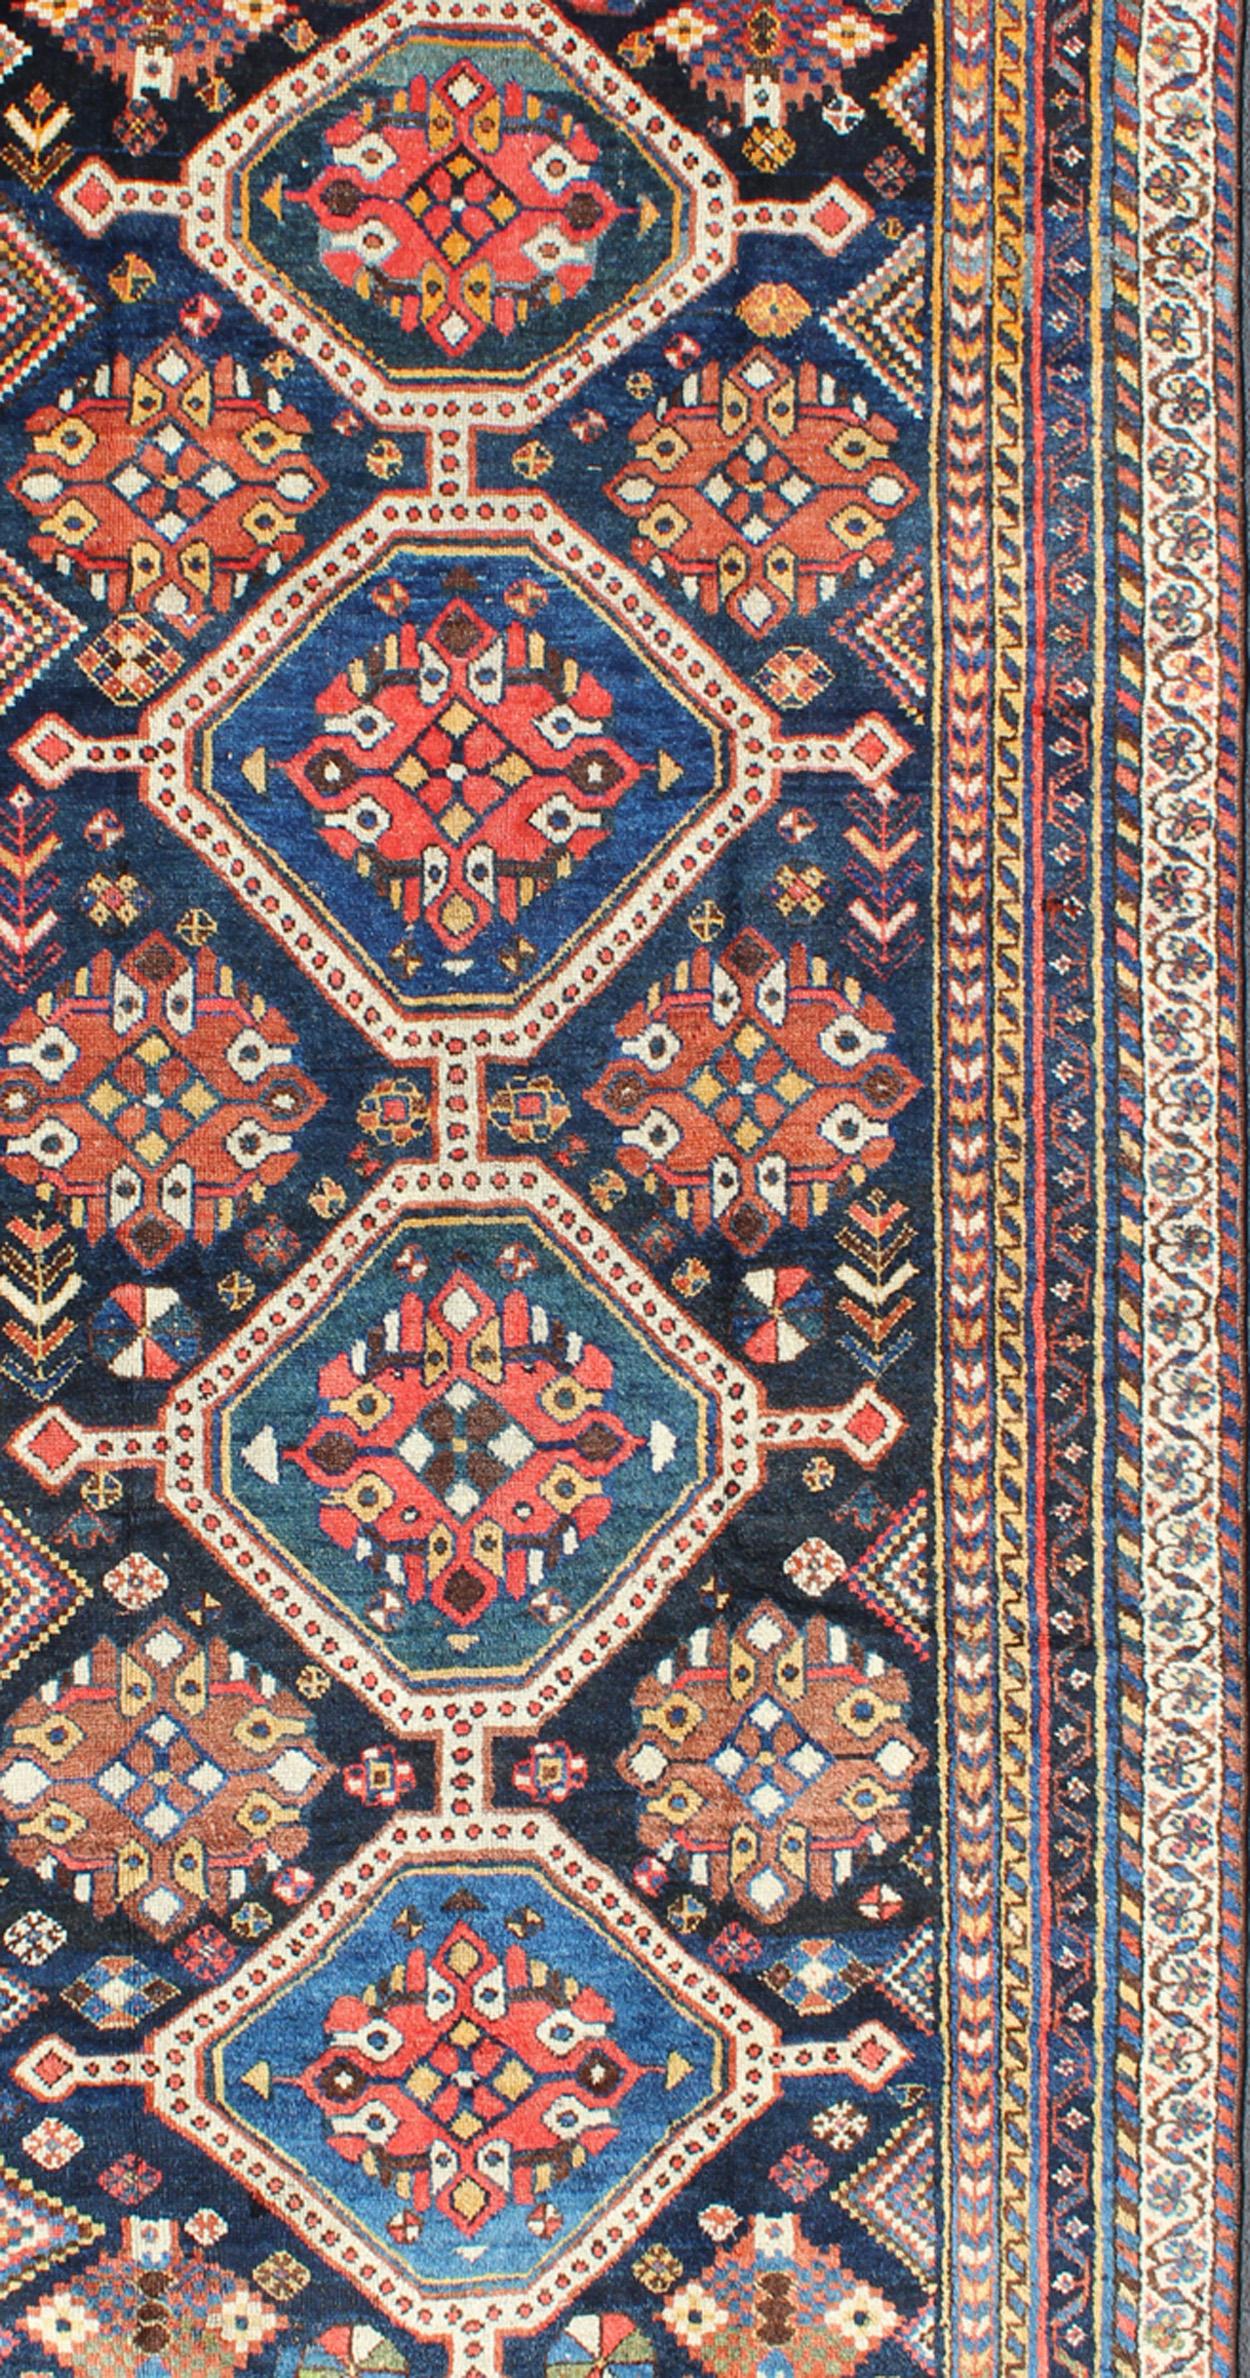 Hand-Knotted Antique Persian Qashqai Rug with Four-Medallion Design in Blue, Red, Brown Tones For Sale